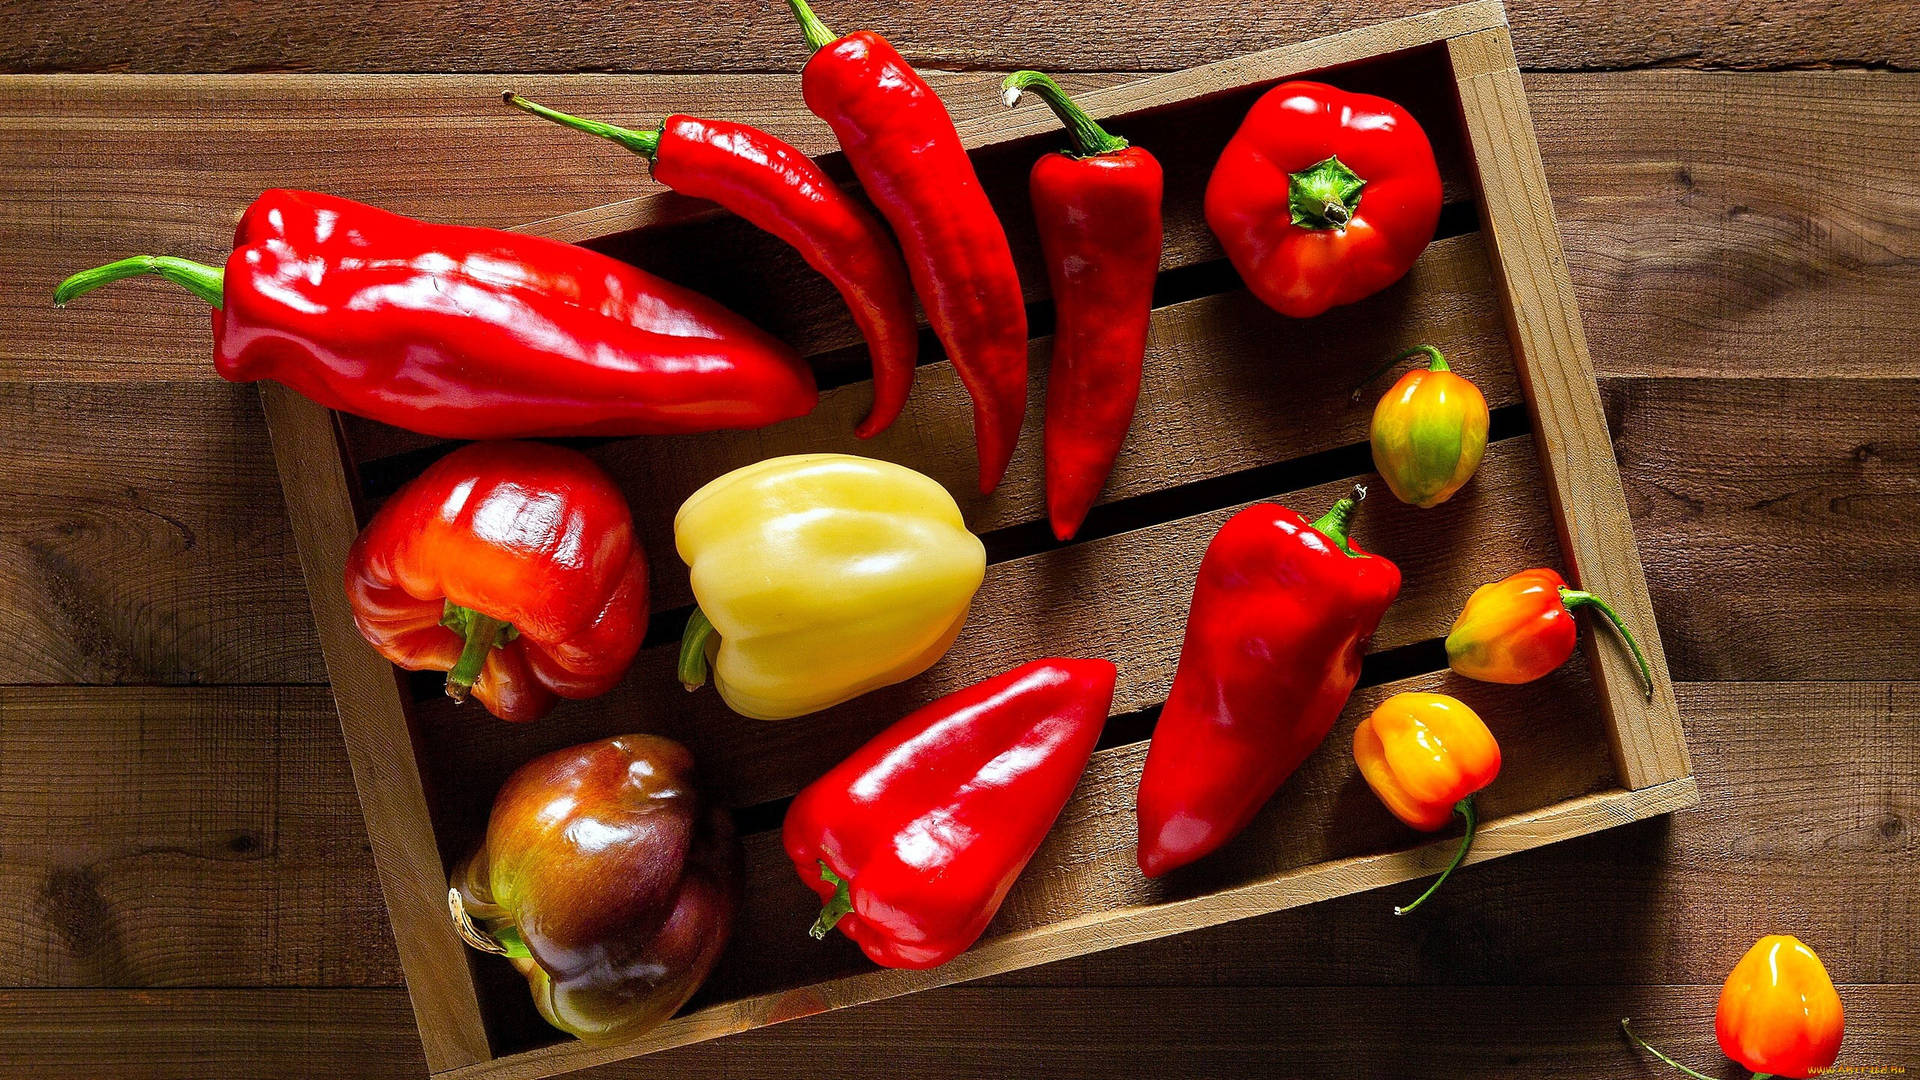 HD wallpaper chili pepper market vegetables food spices chile peppers   Wallpaper Flare